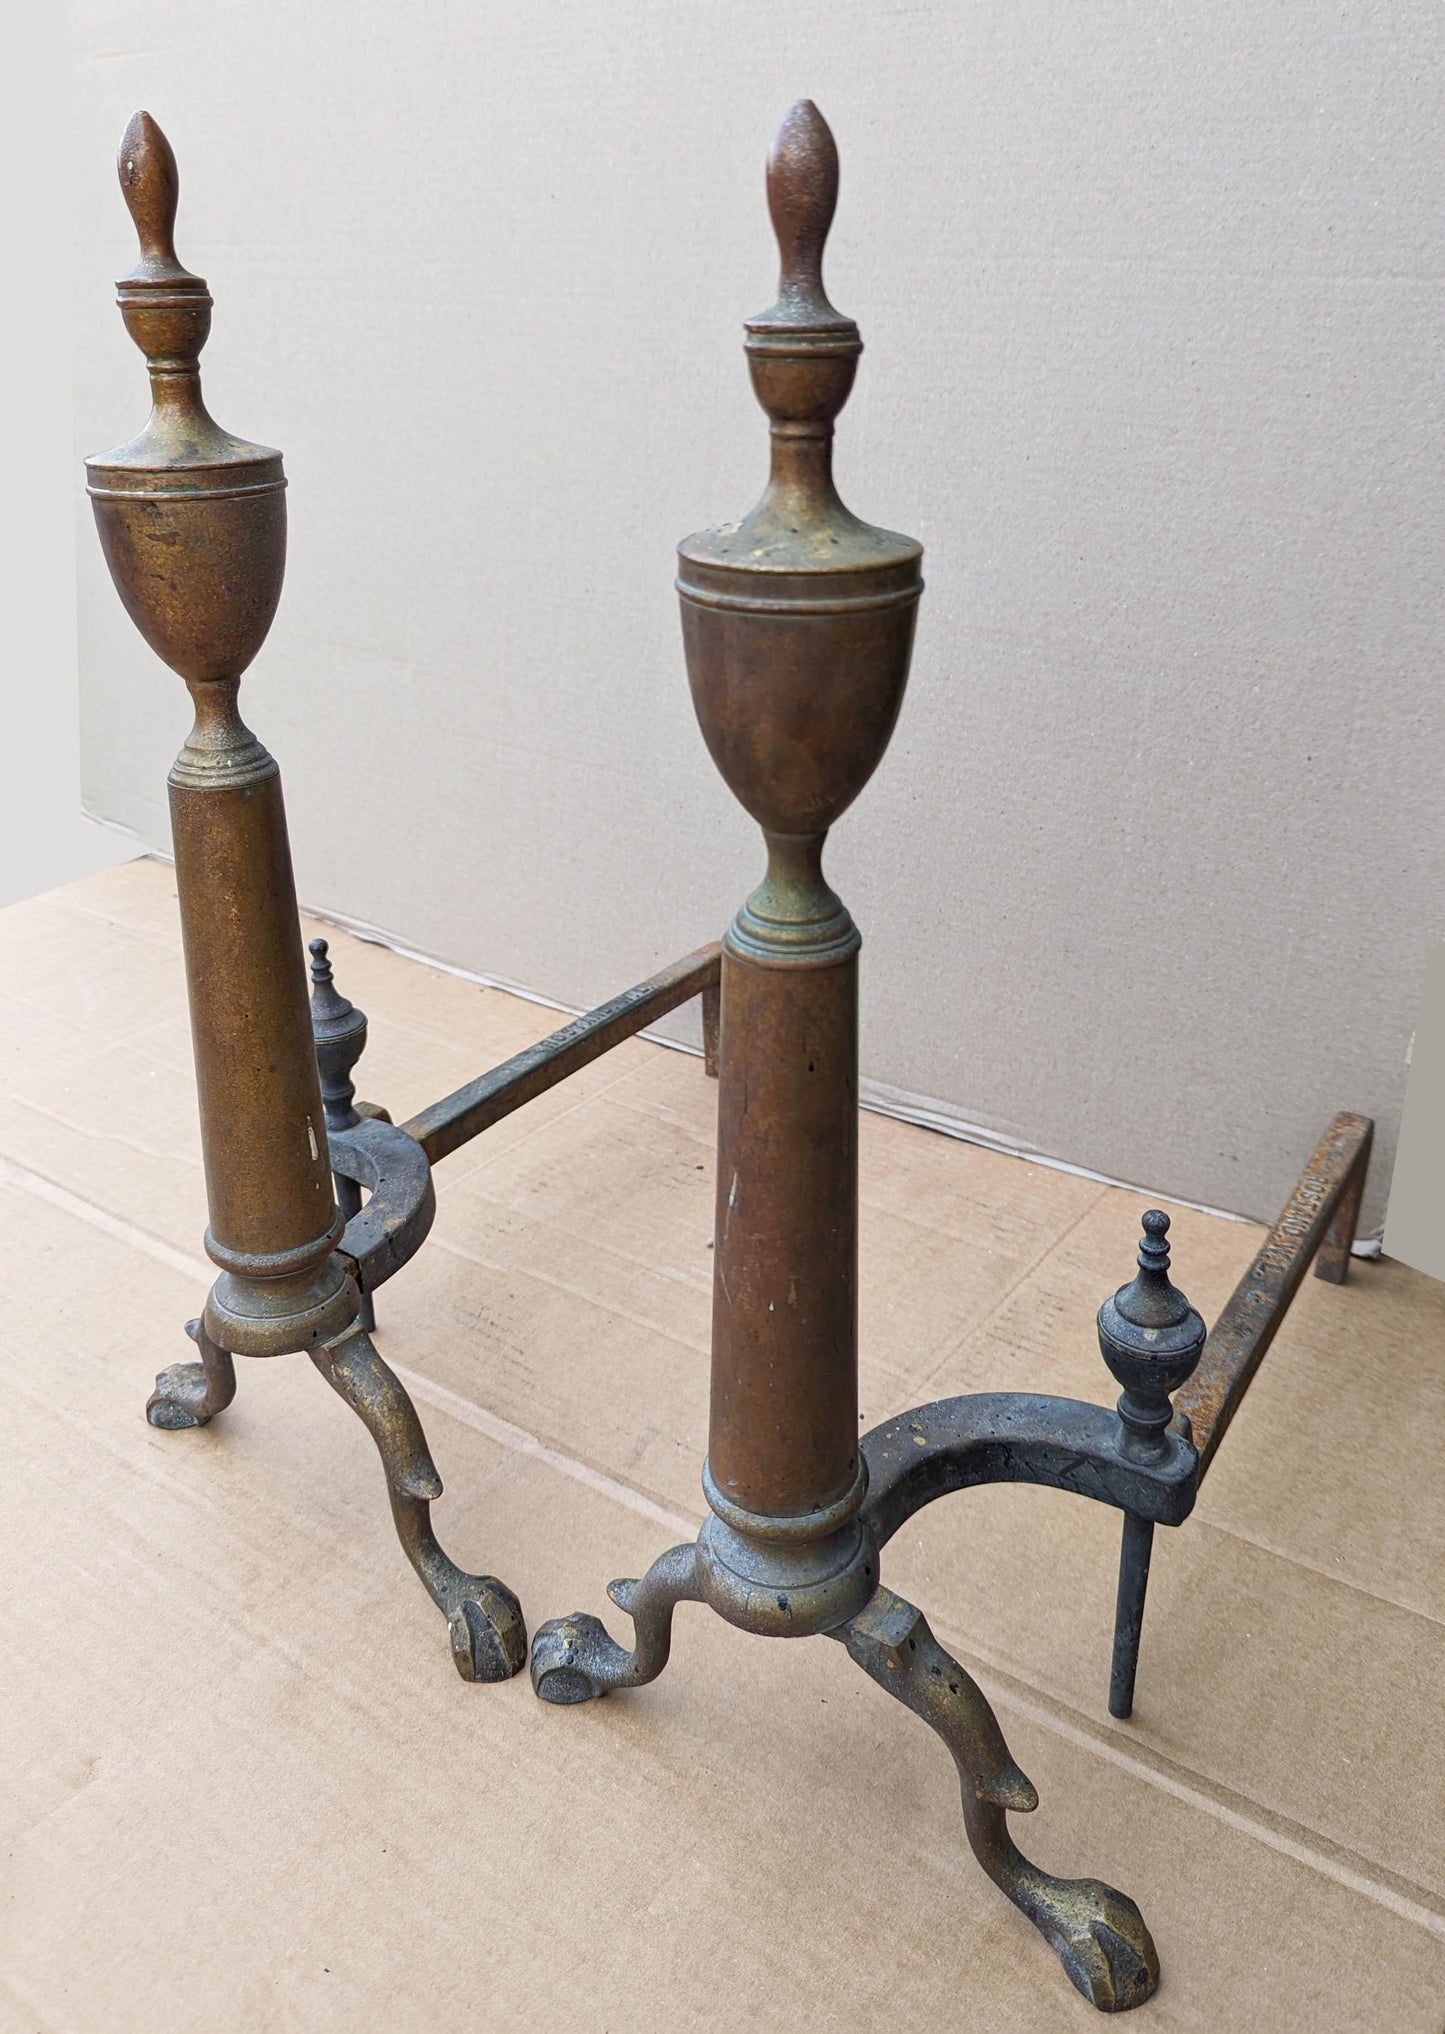 22"H Pair Antique Vintage Old "Rostland W L" Brass Cast Iron Federal Style Fireplace Andirons Firedogs Log Holders